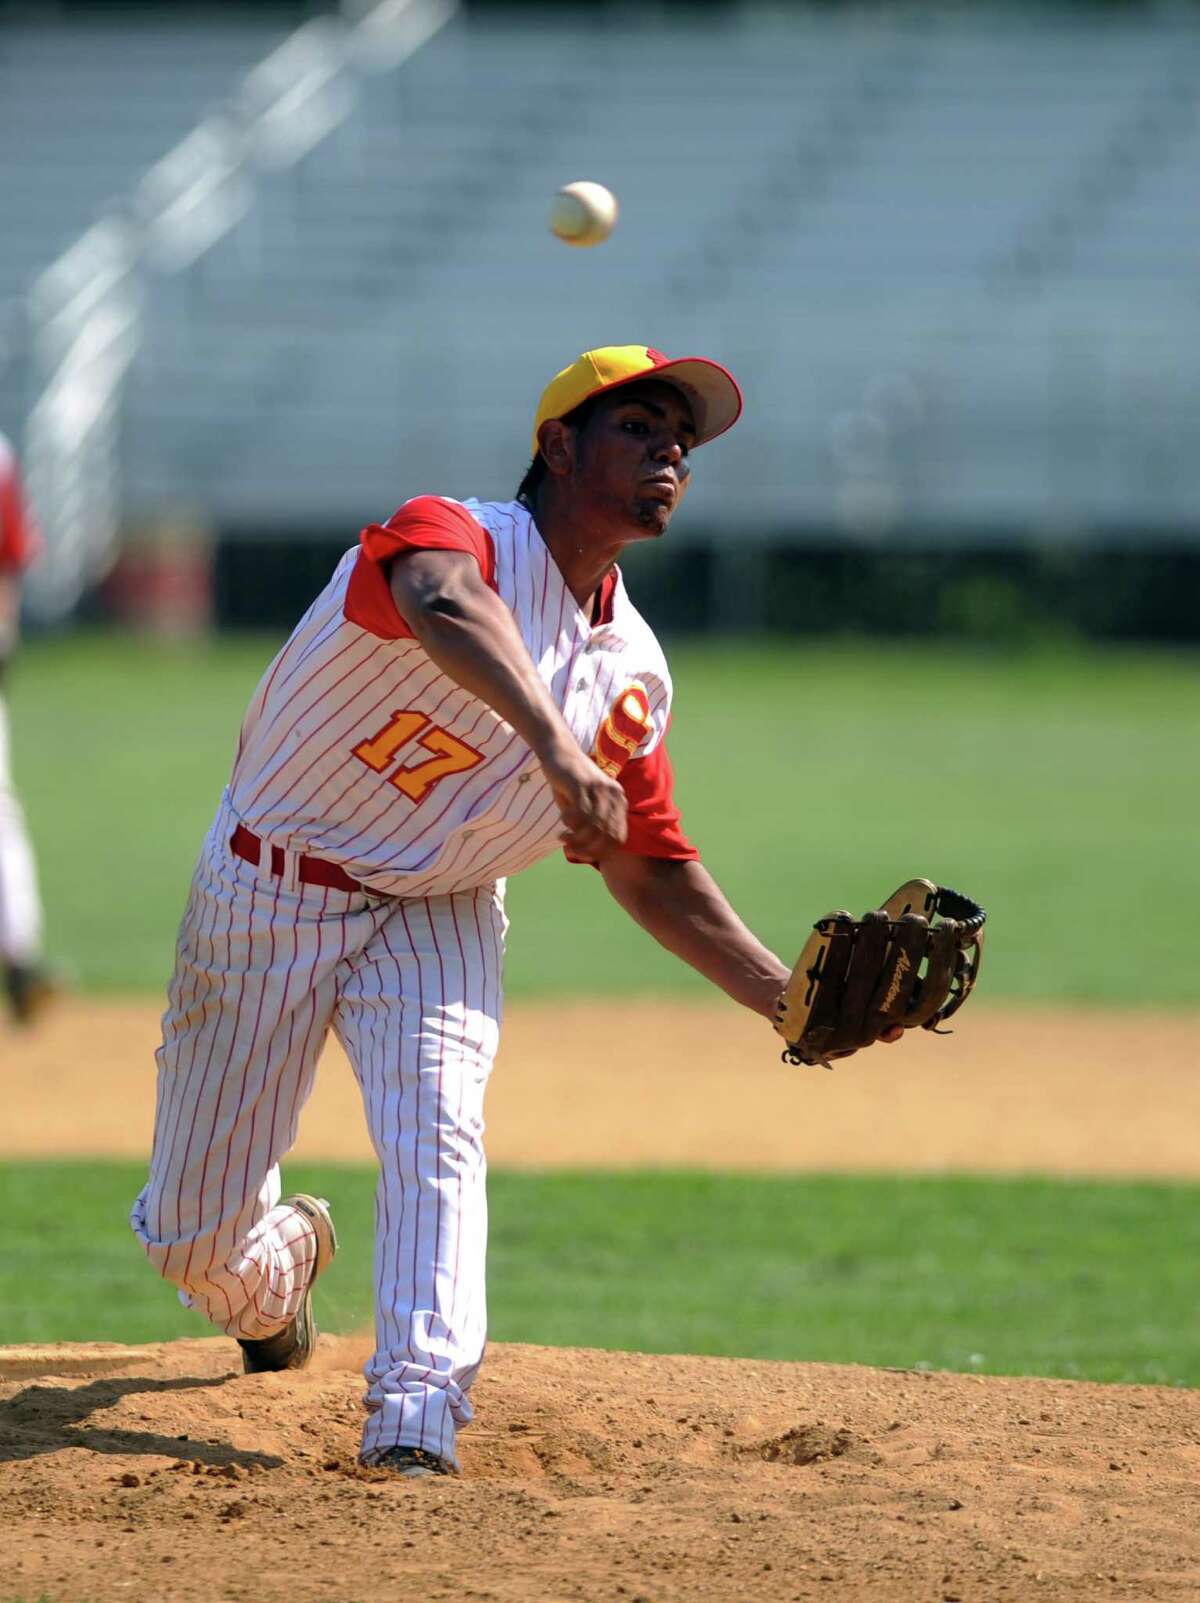 Stratford's Axel DeJesus pitches during the Class L first round state baseball tournament game against Foran High School, of Milford, Tuesday, May 29, 2012 at Penders Field in Longbrook Park in Stratford, Conn.